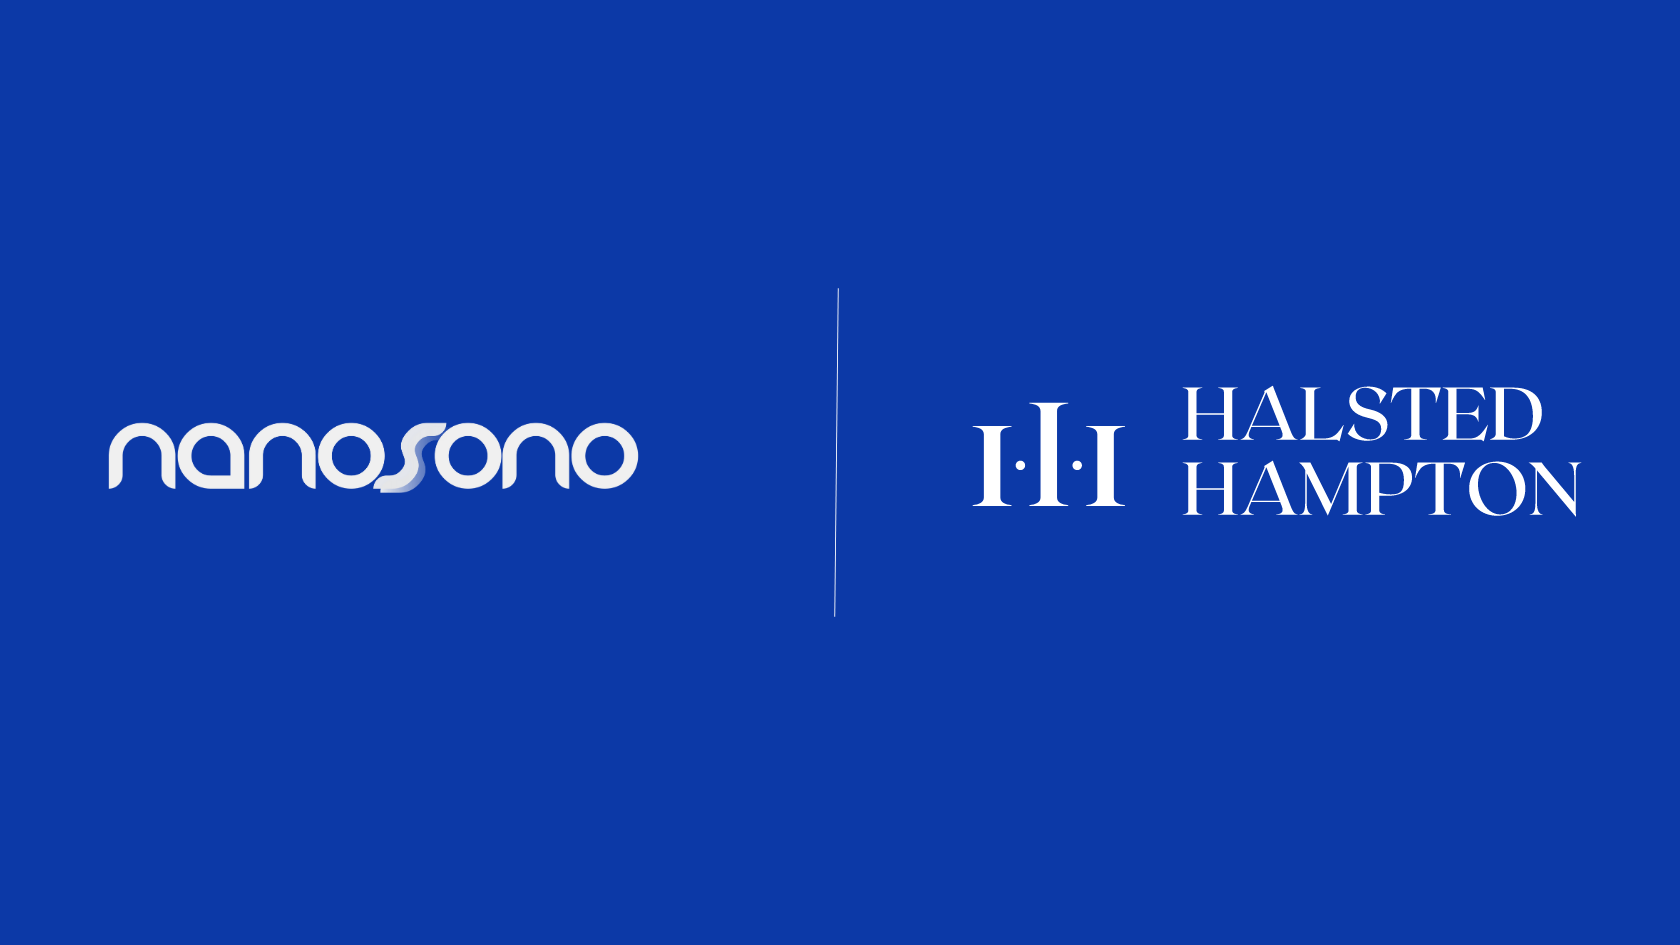 Halsted Hampton is launching the line of cosmeceutical products  based on Nanosono’s skincare technology